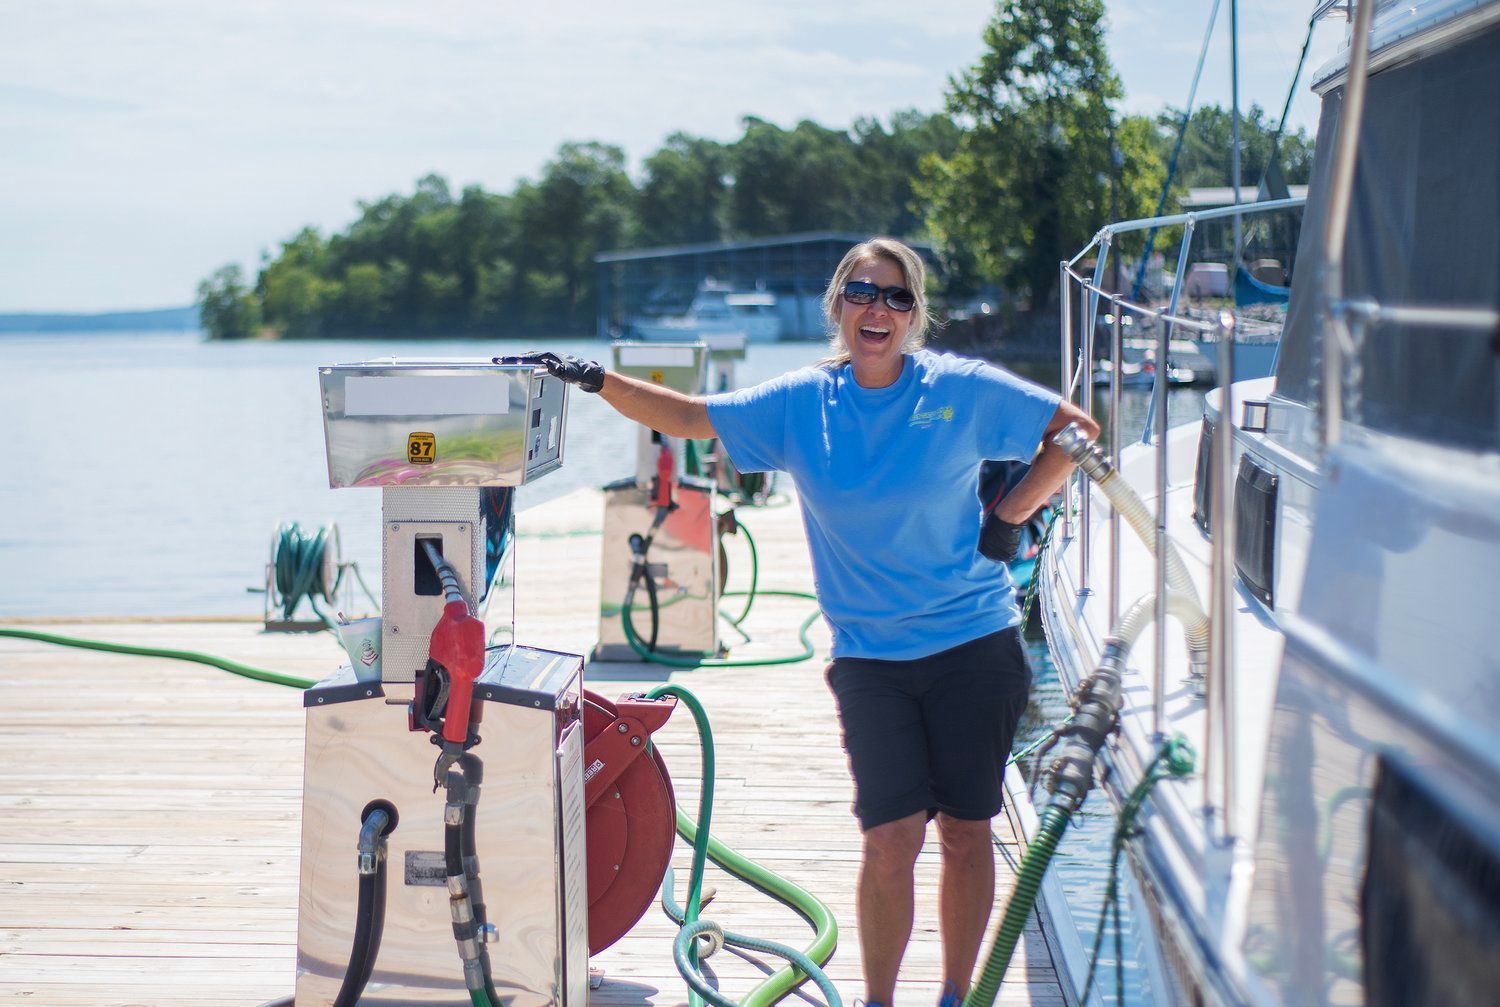 A woman is pumping gas into a boat on a dock.